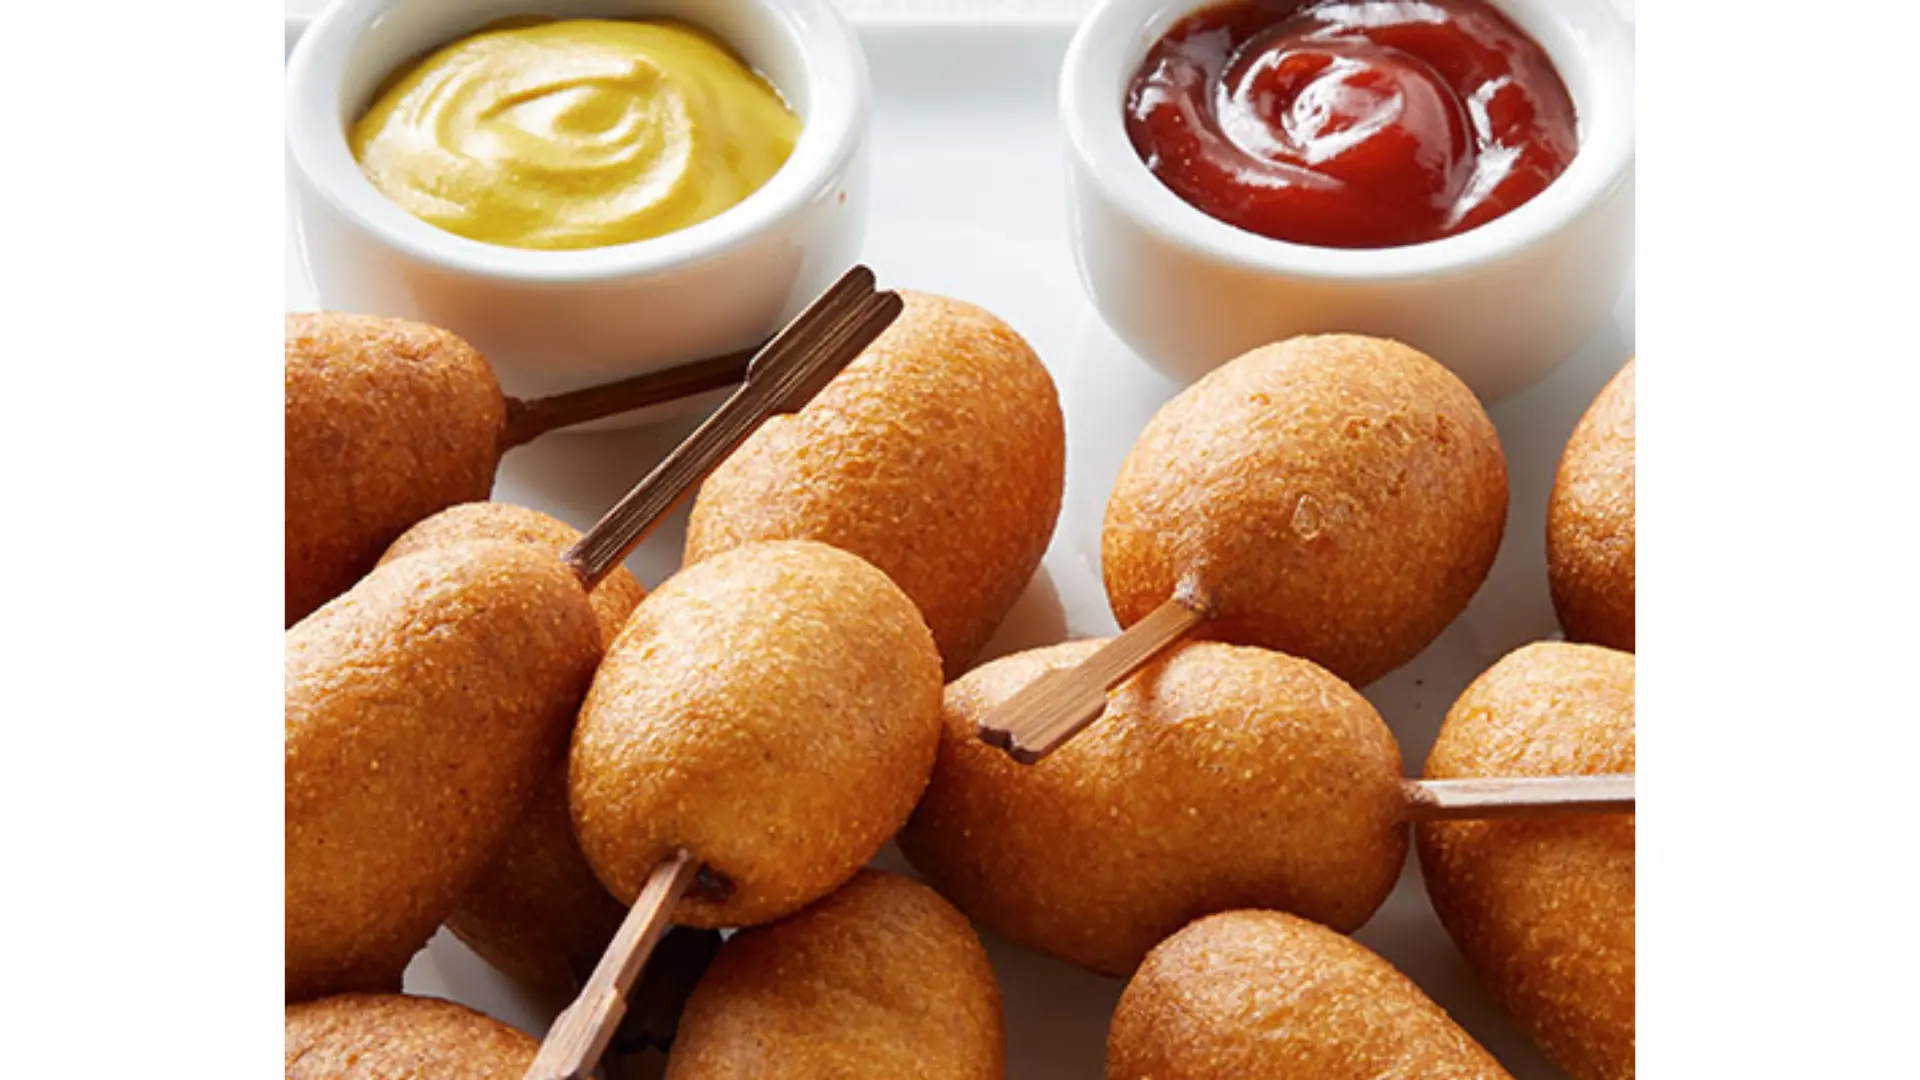 What You Can Serve With Mini Corn Dogs